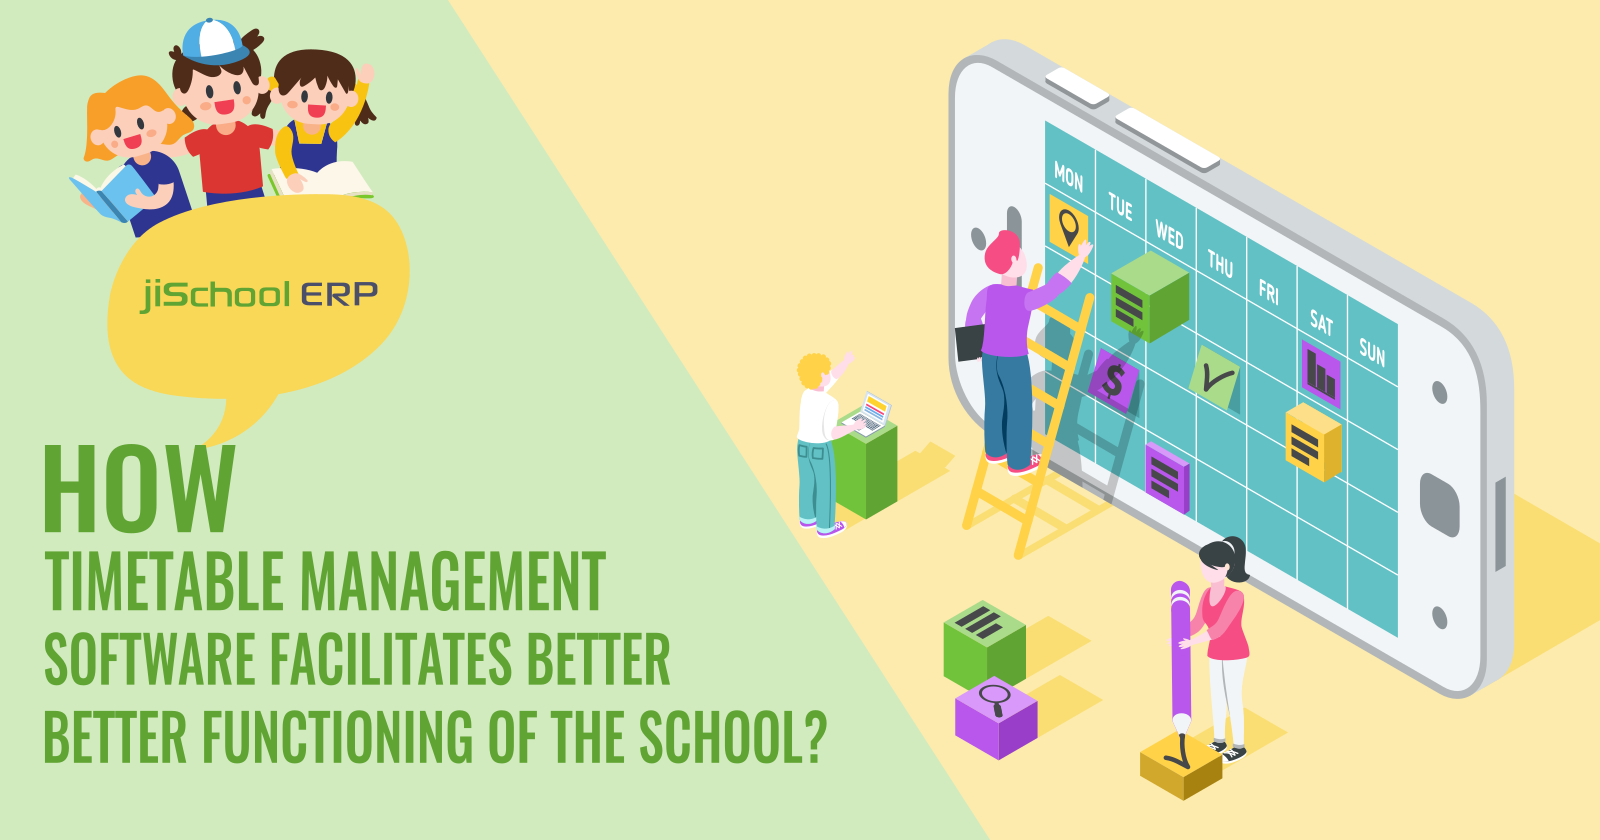 How Timetable Management Software Facilitates Better Functioning of the School?